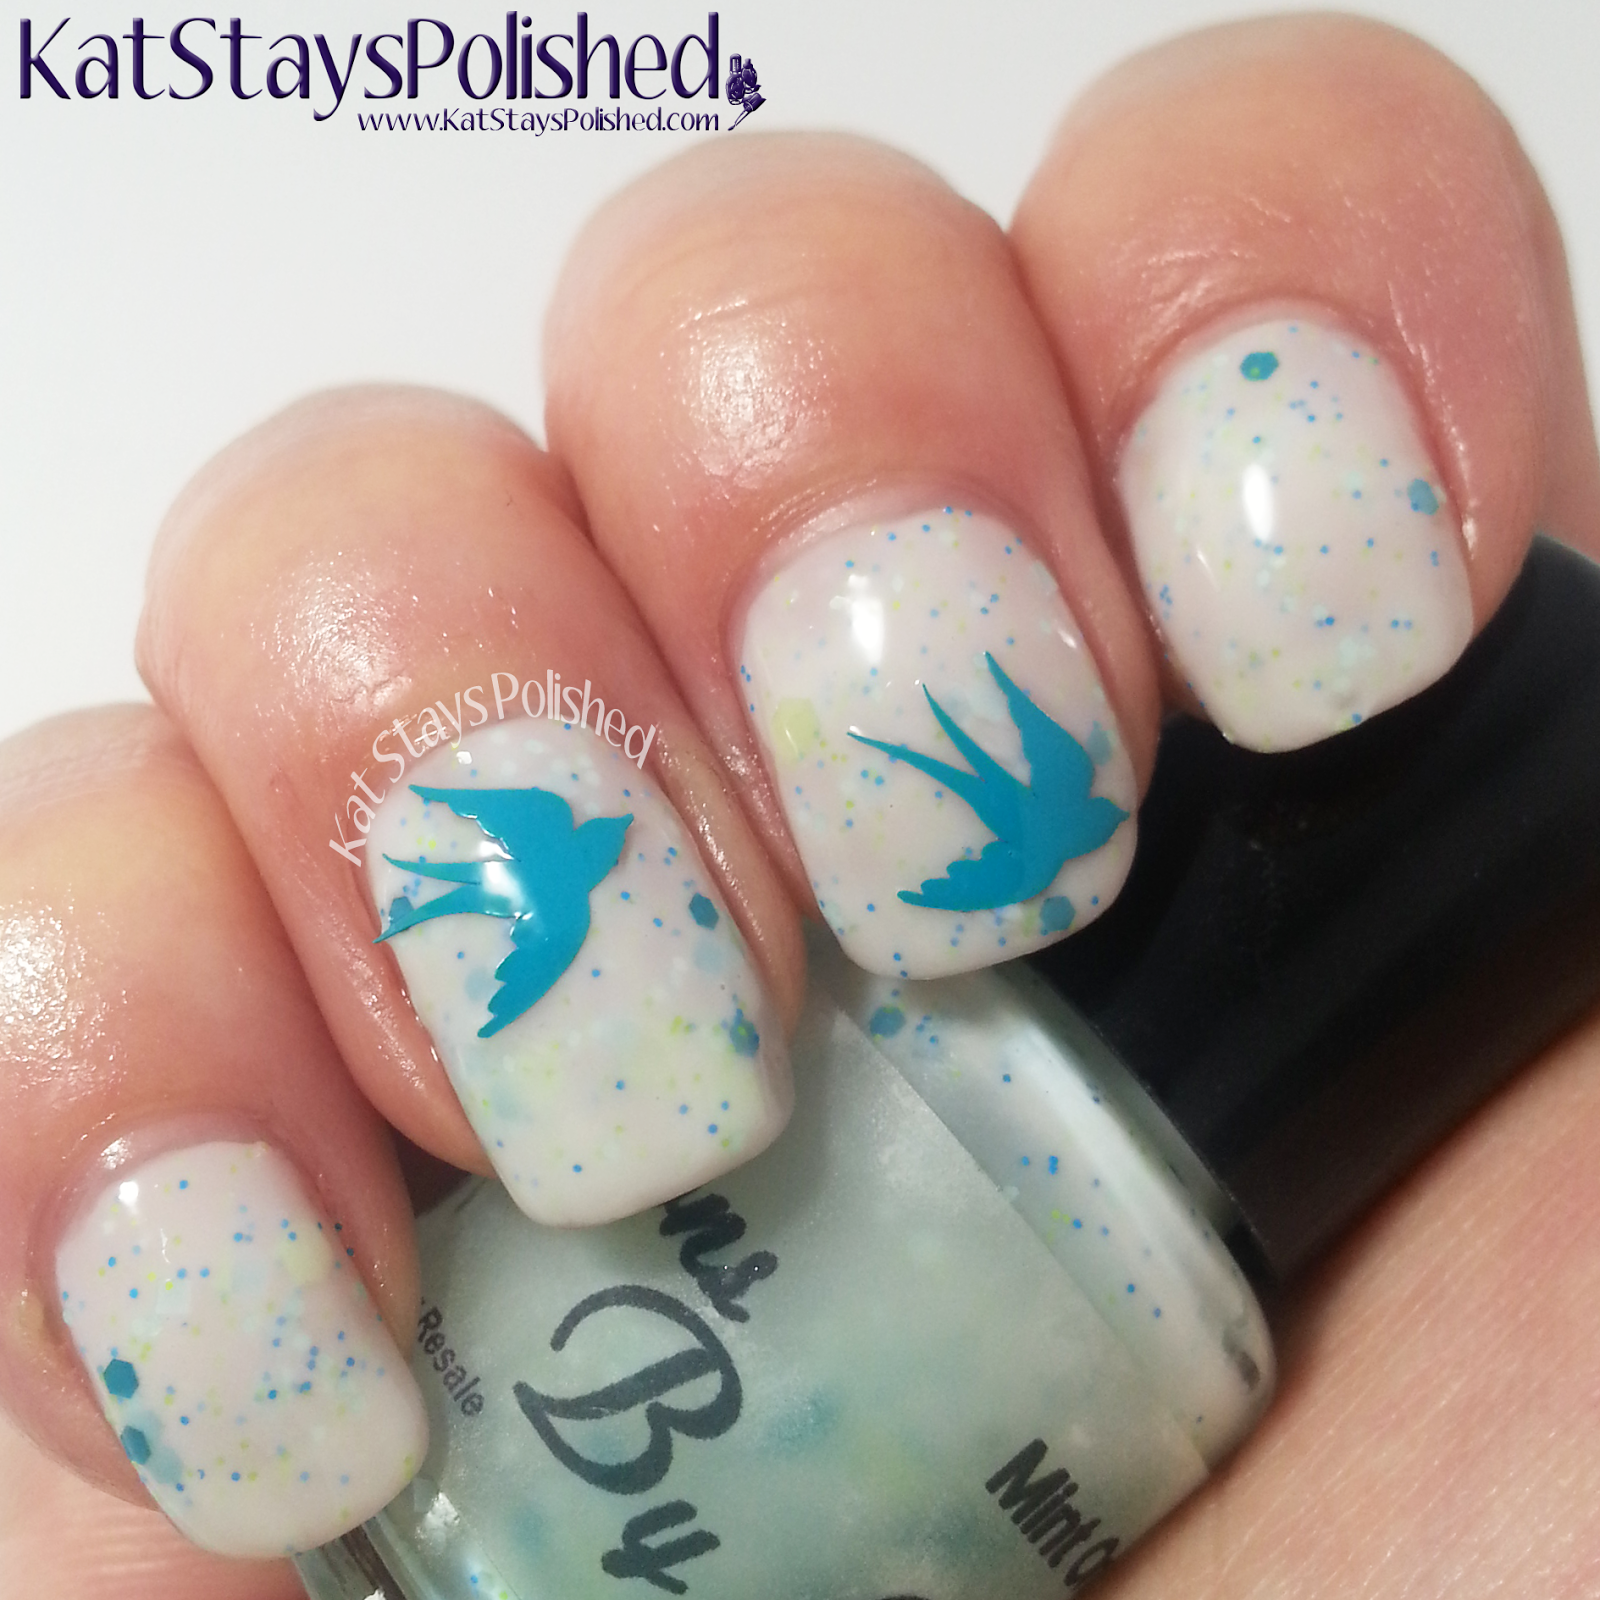 You Polish Nail Decals | Creations by Lynda Mint Orchid | Kat Stays Polished